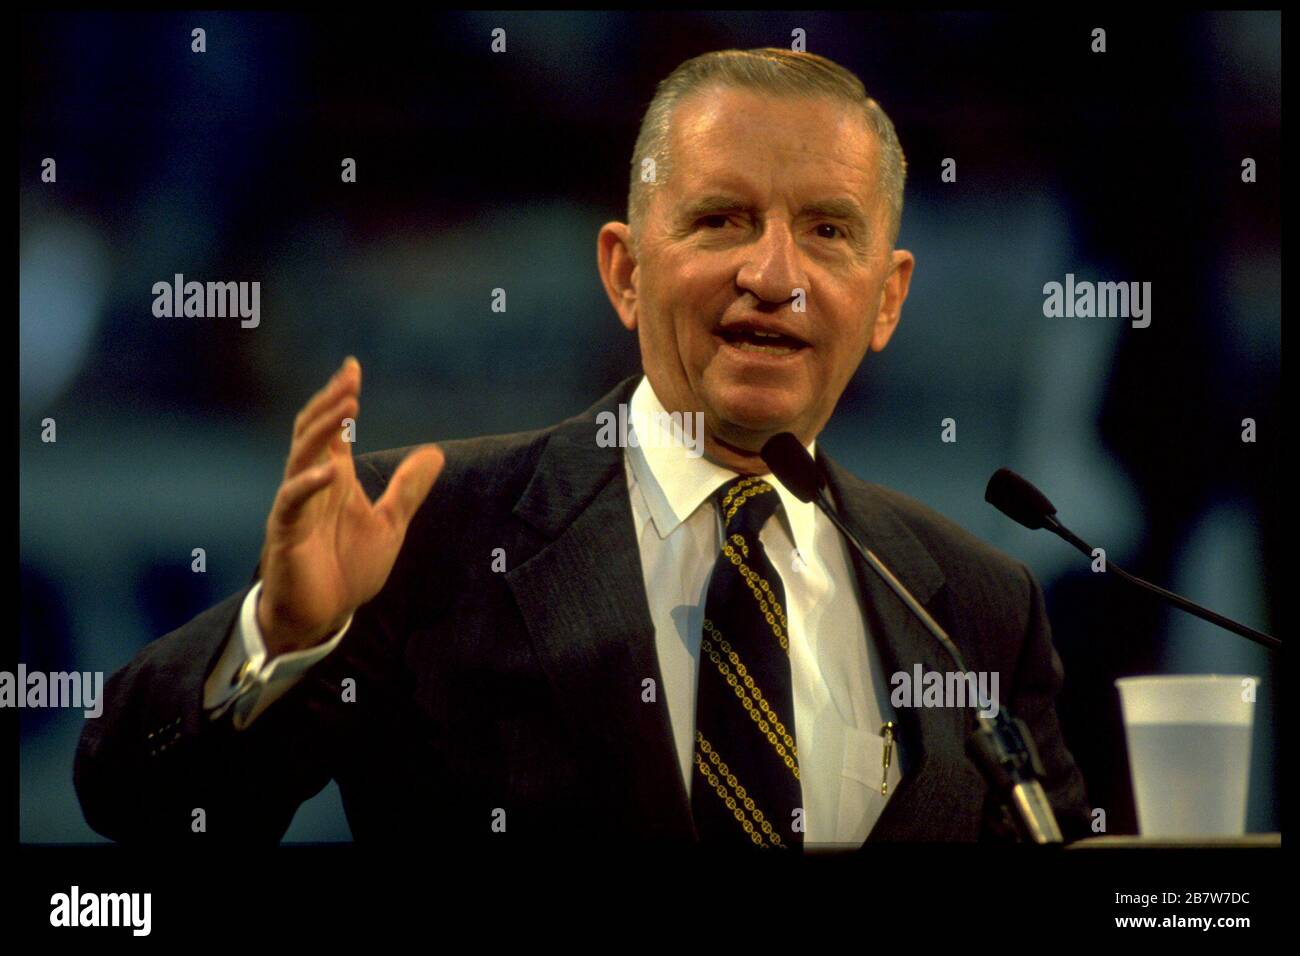 Dallas Texas USA, 1992: Wealthy Texas businessman H. Ross Perot speaks at a rally during his campaign as a third-party candidate for president of the United States. ©Bob Daemmrich Stock Photo